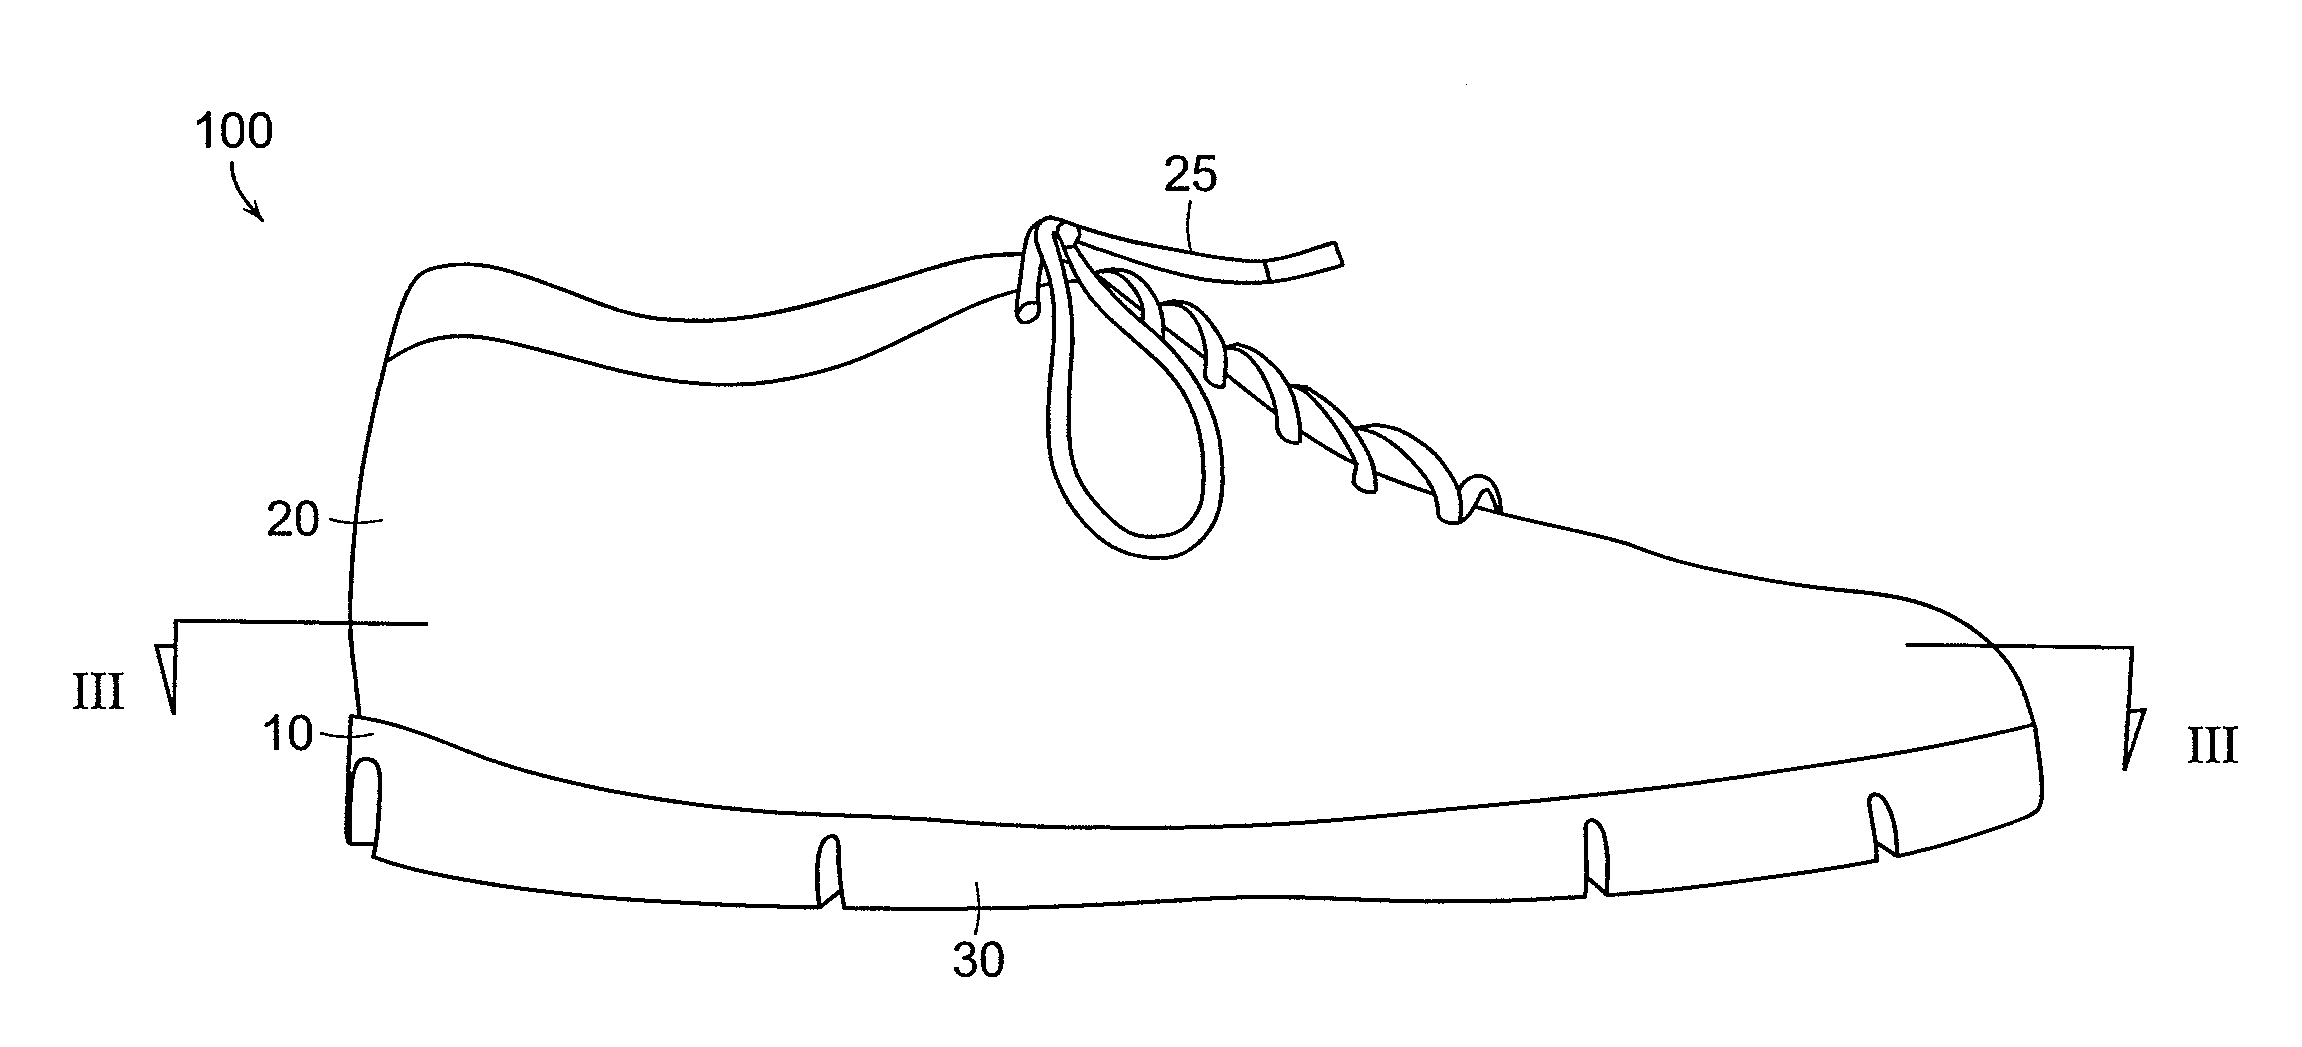 Channeled sole for an article of footwear